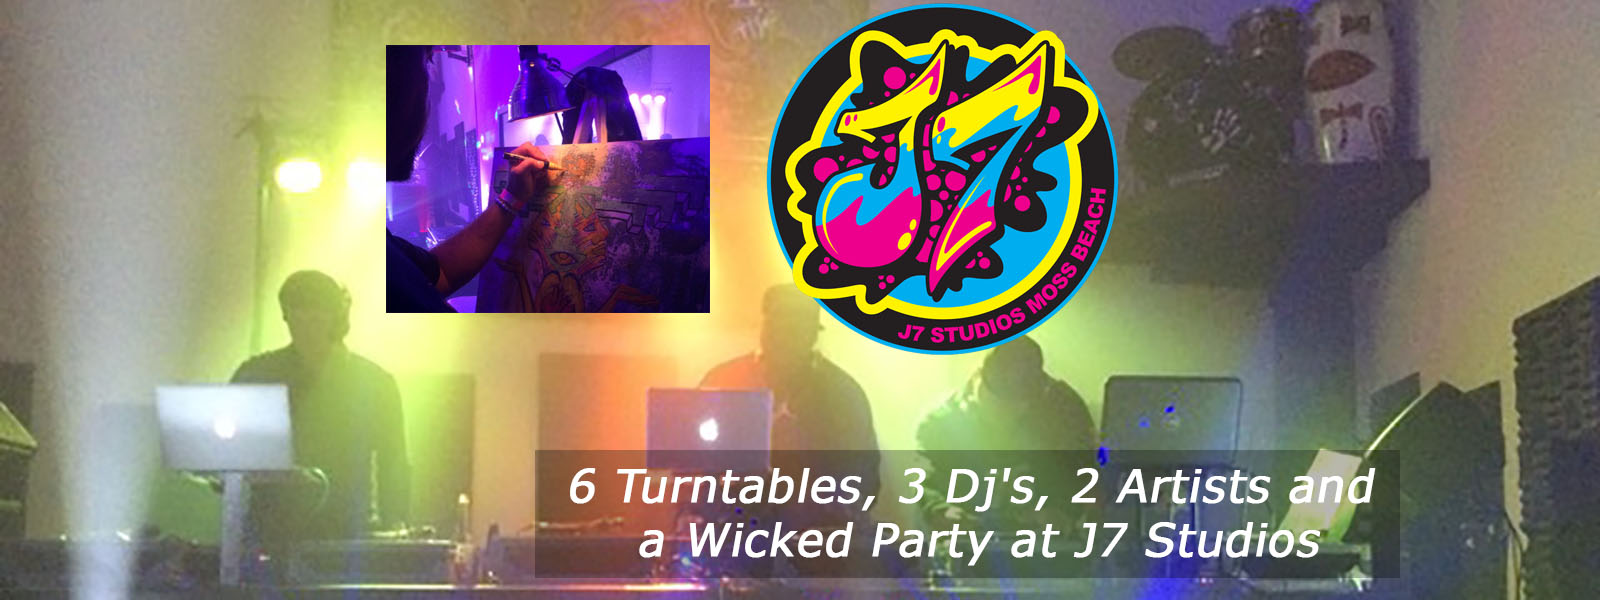 6 Turntables, 3 Dj’s, 2 Artists and a Wicked Party at J7 Studios